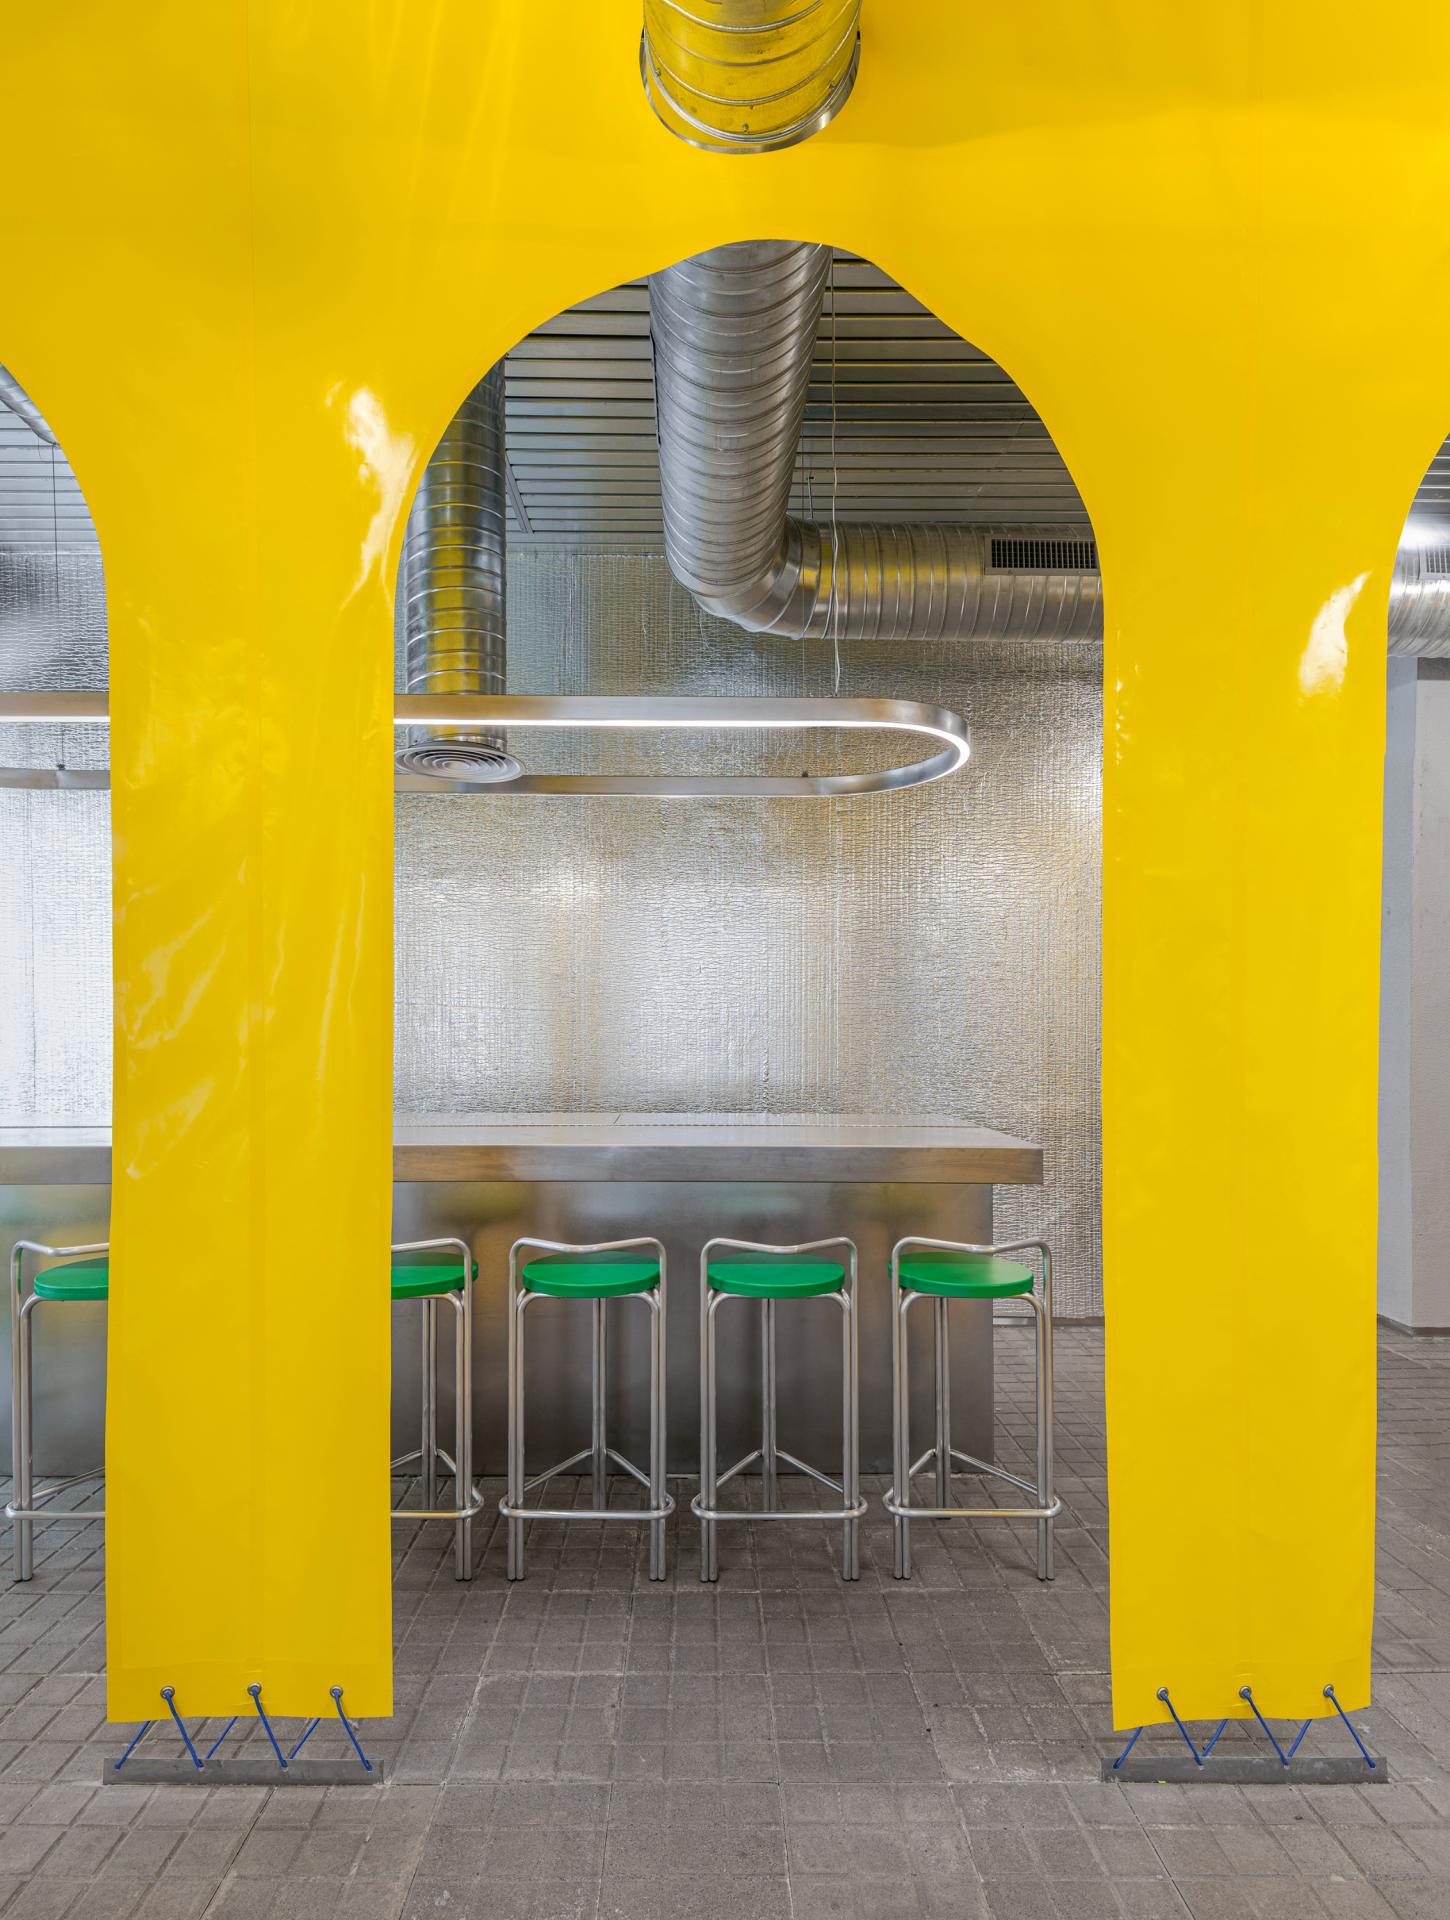 This burrito joint in Madrid gets a flavoursome makeover with plenty of street appeal